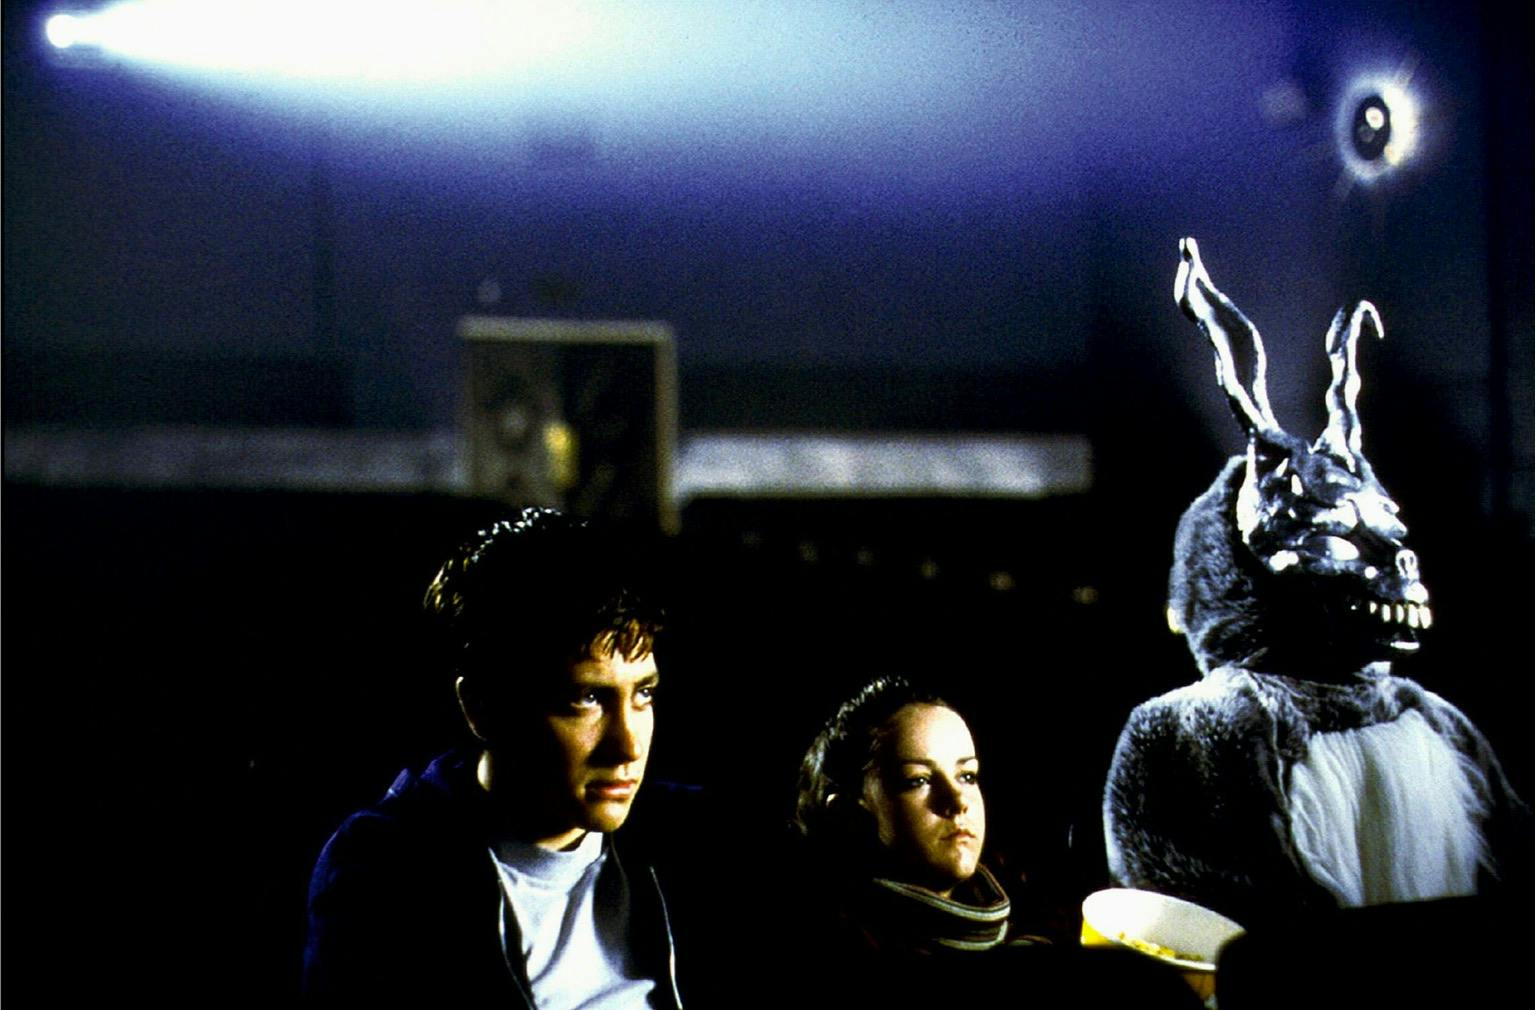 Donnie Darko (Jake Gyllenhaal) and Gretchen Ross (Jena Malone) in Donnie Darko (2001) sit beside the man in a large rabbit suit in a movie theater. The shot is dark but Gyllenhaal looks angry and wearied.